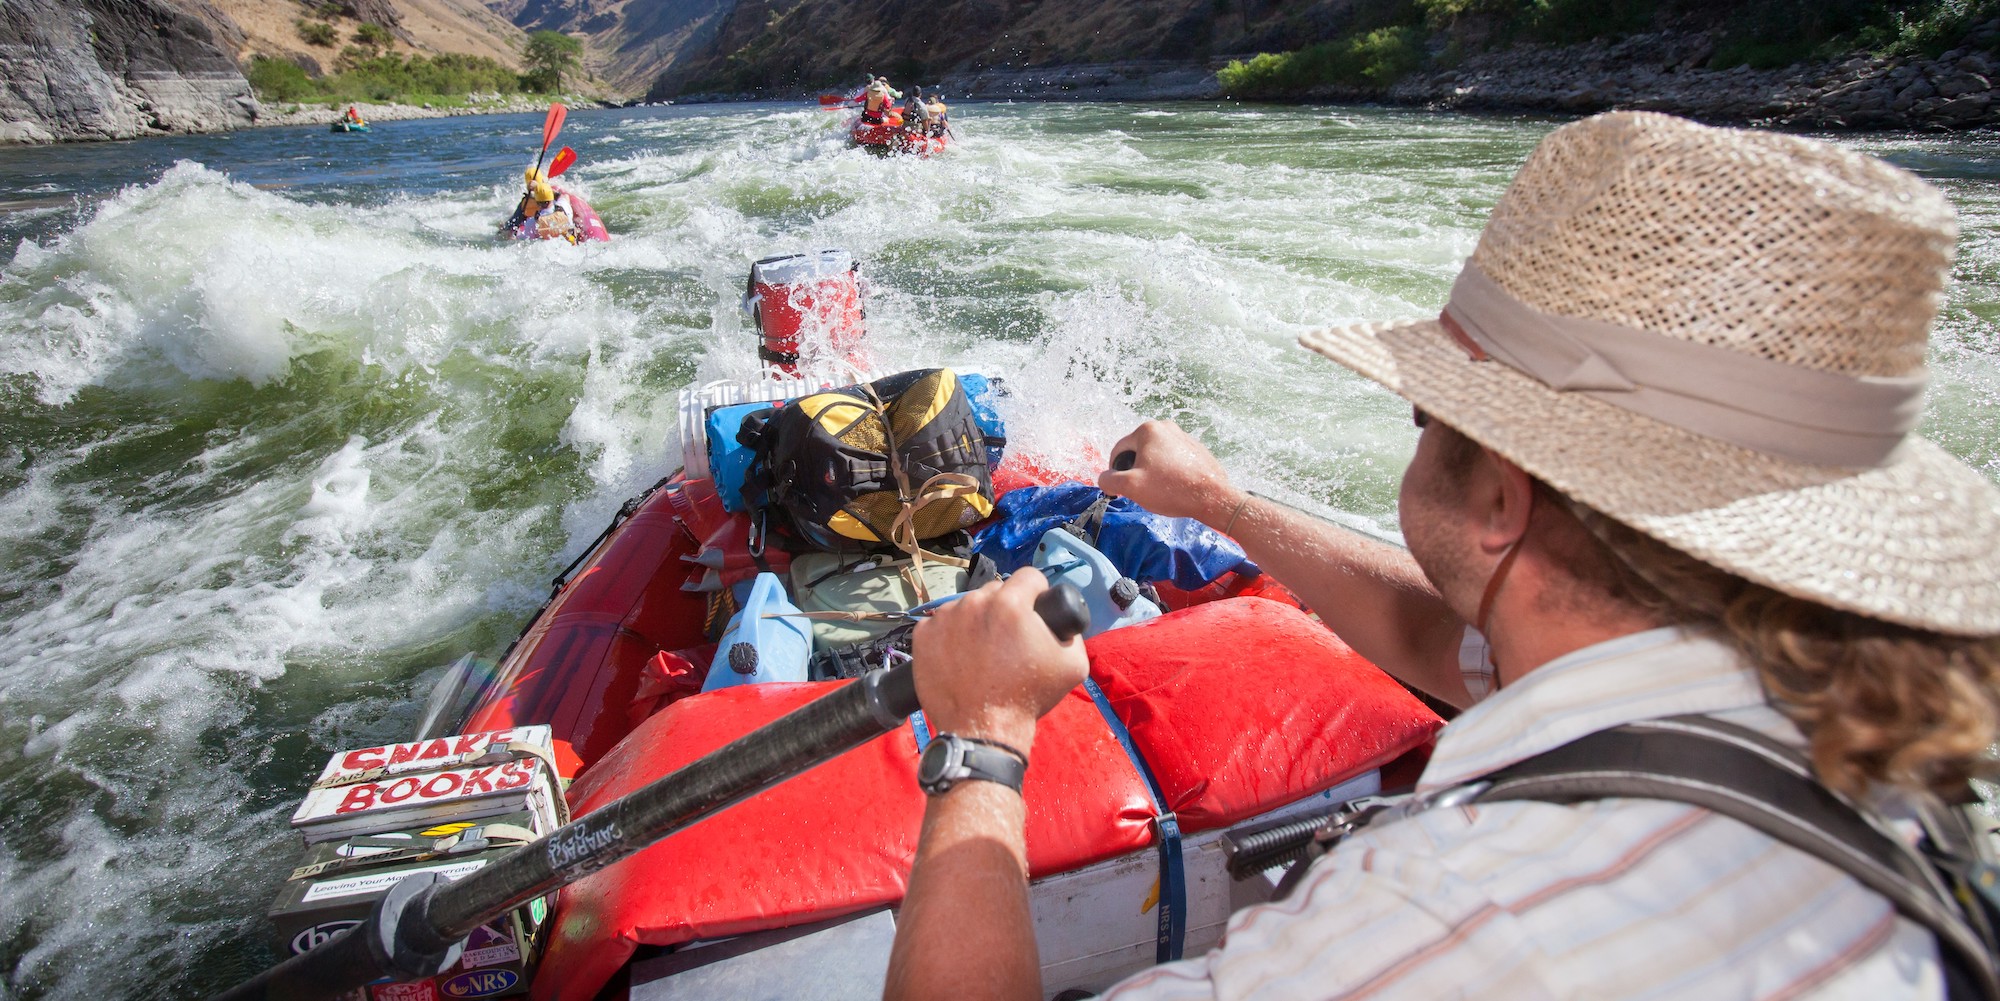 Downstream angle of an oarsmen in a red raft rowing through a rapid on the Snake River